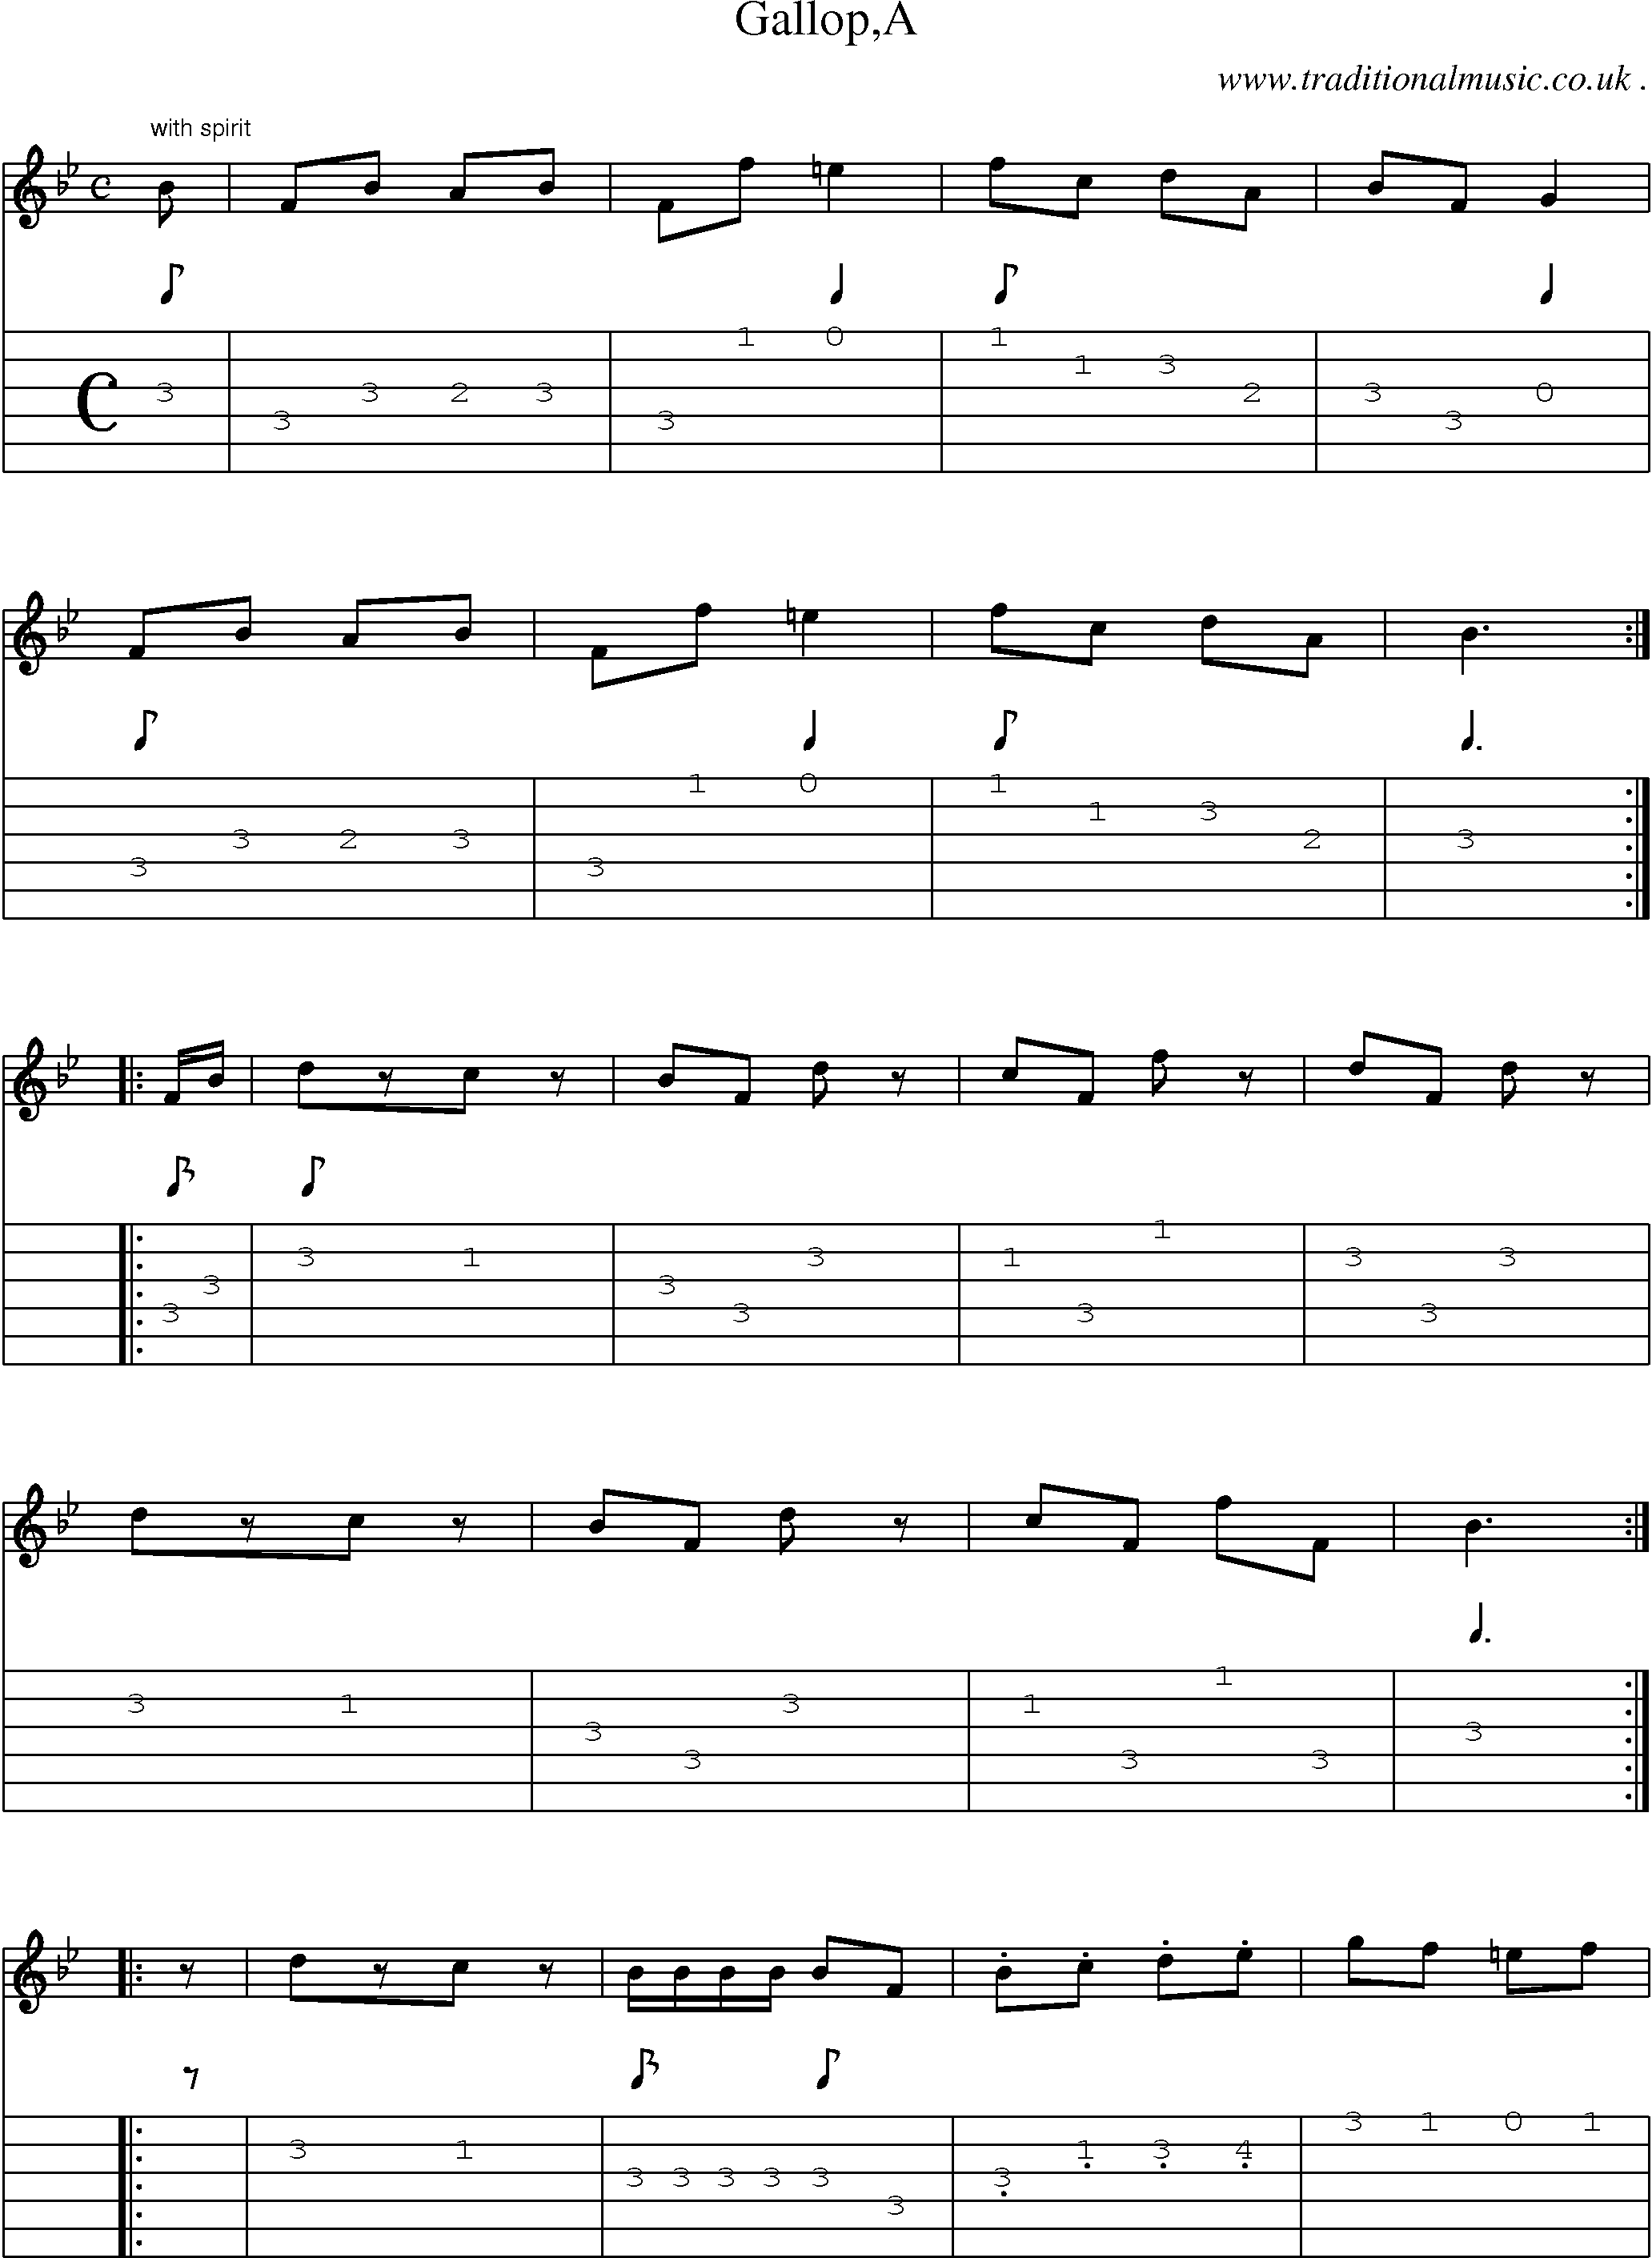 Sheet-Music and Guitar Tabs for Gallopa